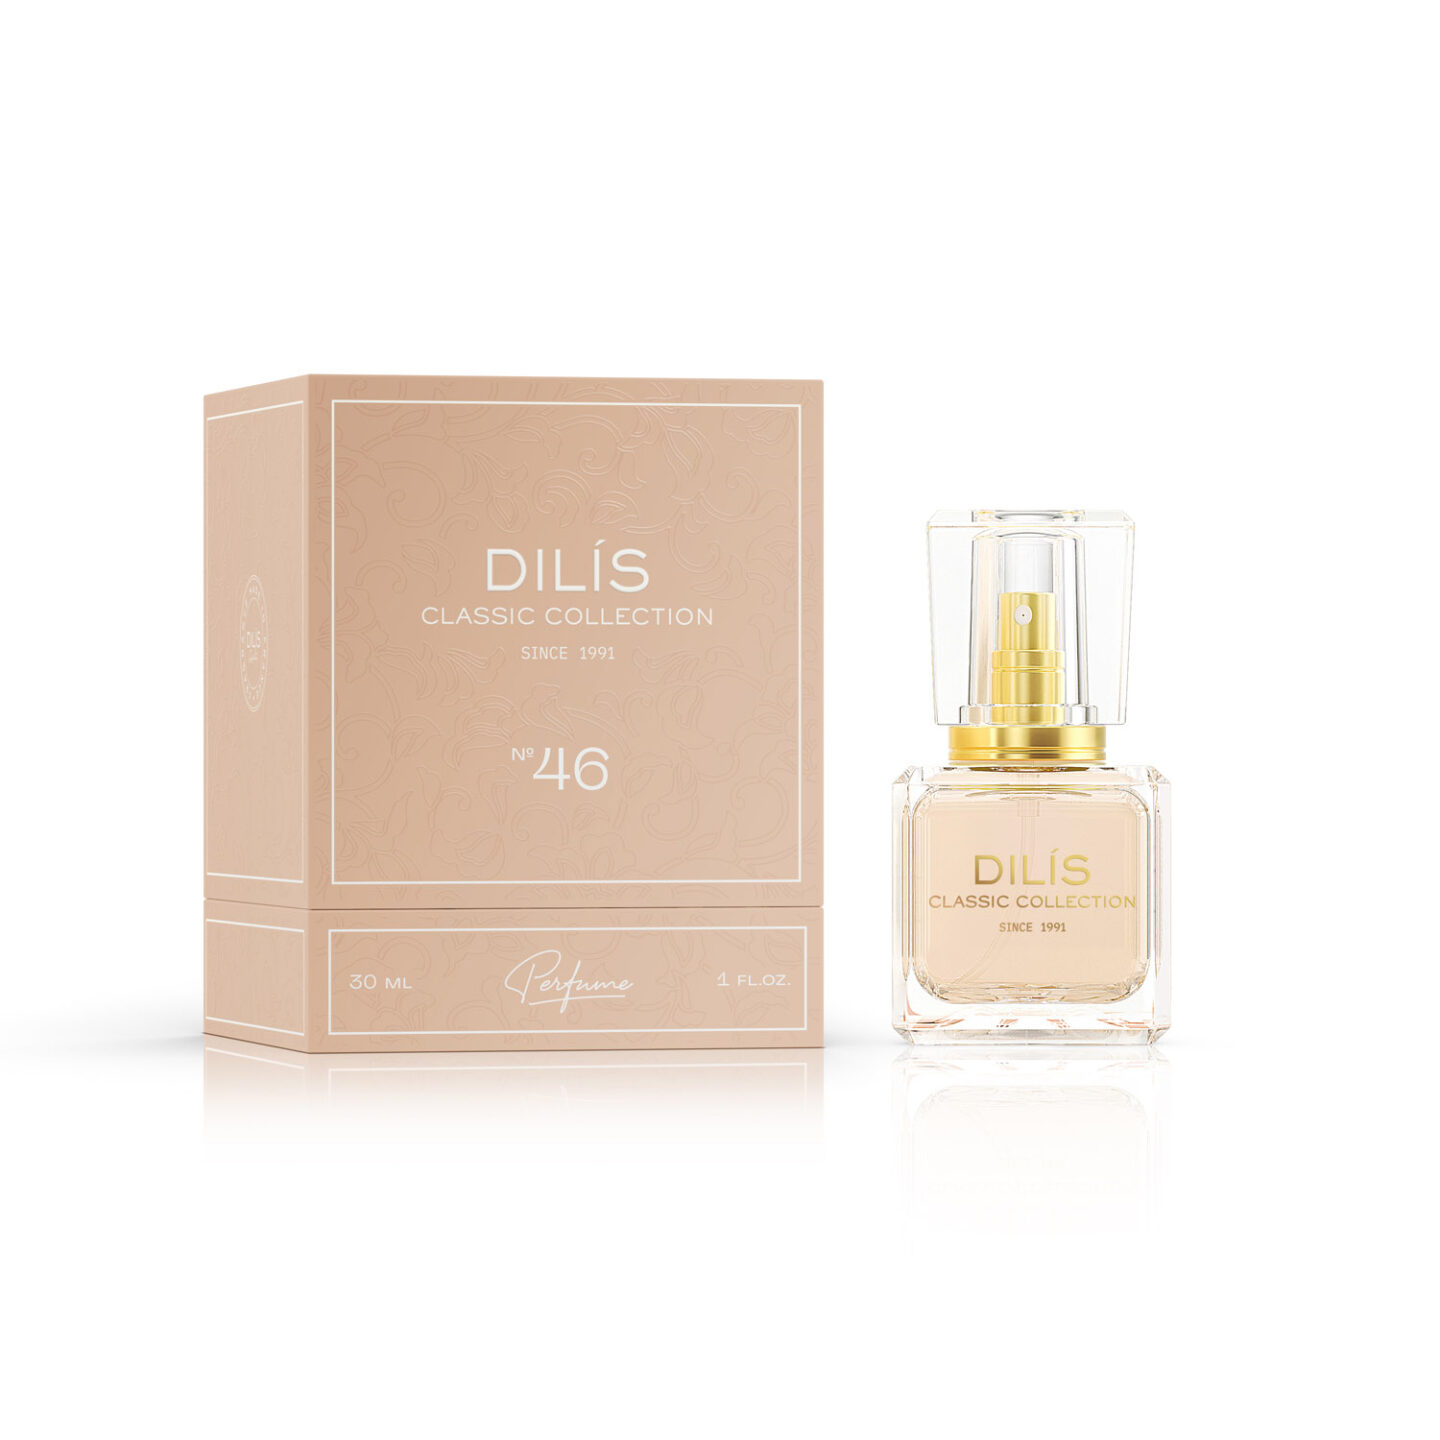 Духи женская Dilis Classic Collection №46 parfum 30 мл classic fun collection 5 in 1